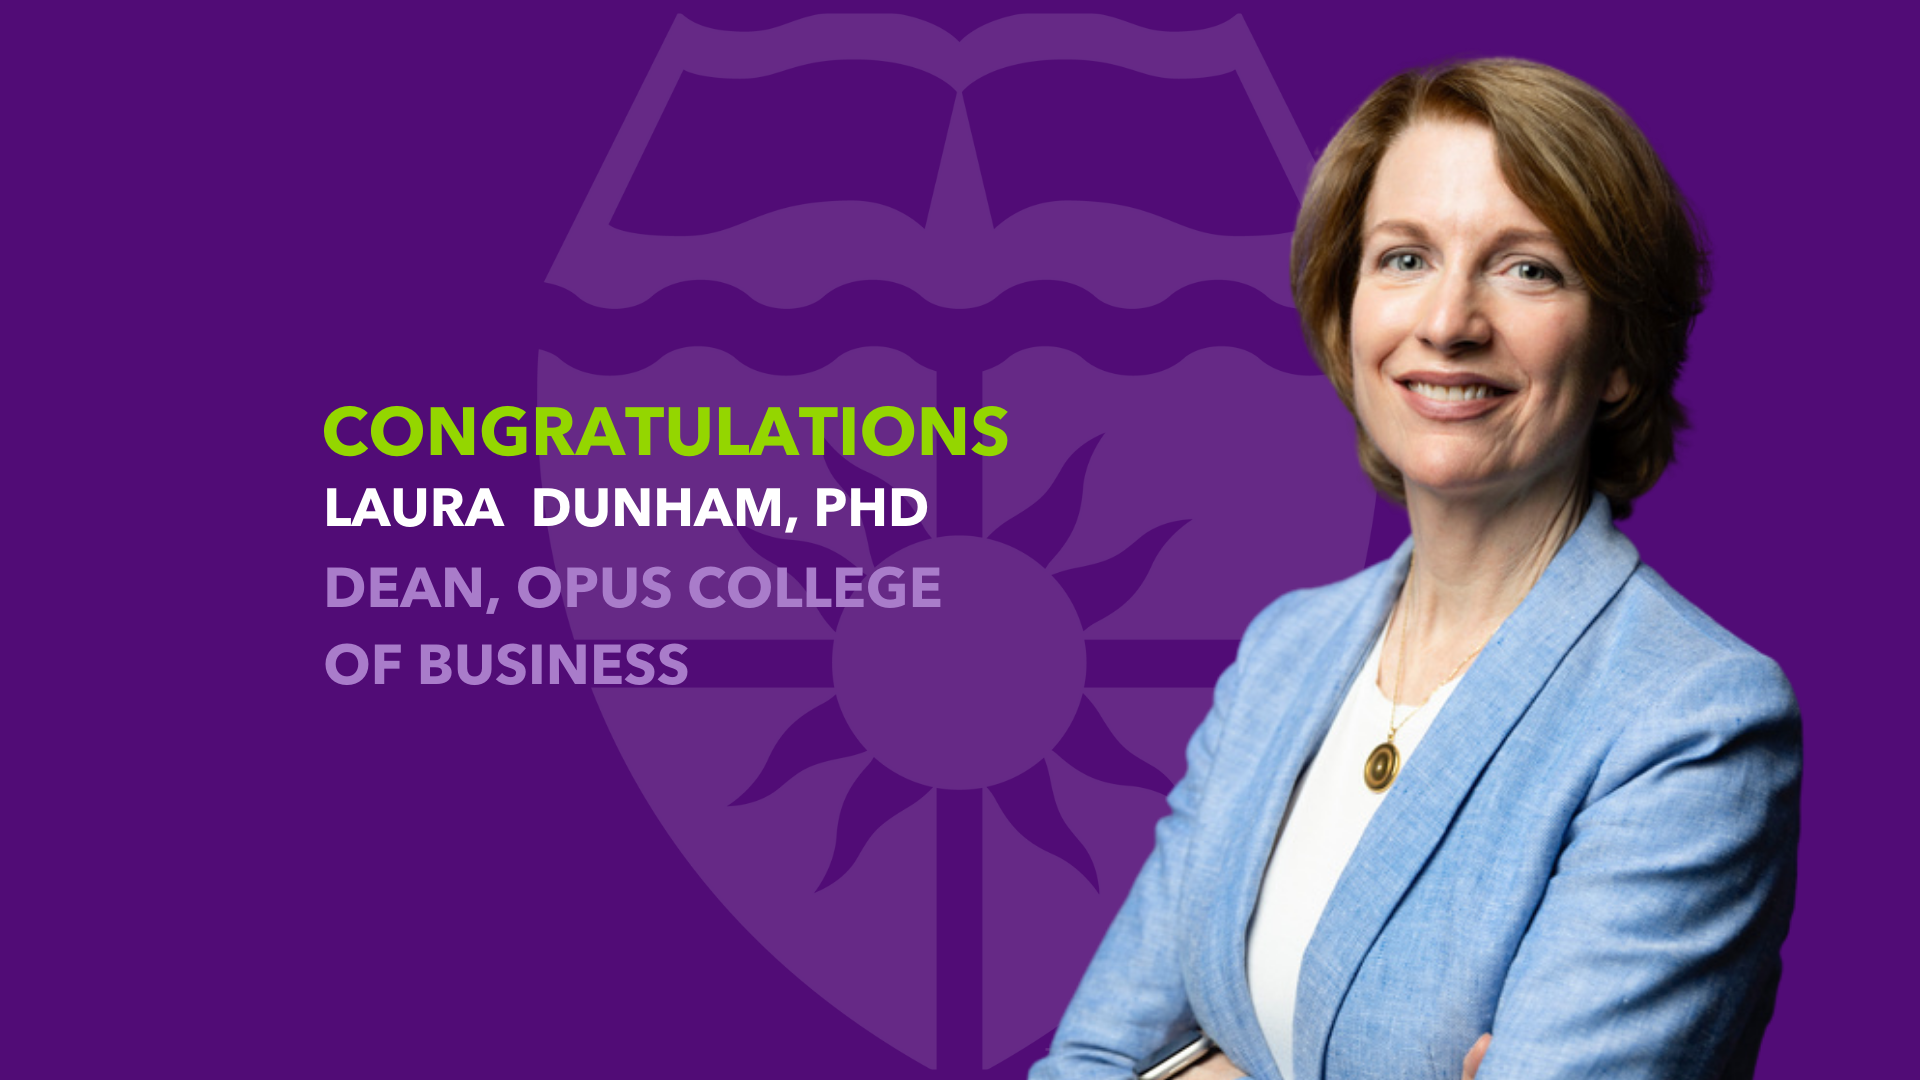 University Of St Thomas Names Dr Laura Dunham Opus College Of